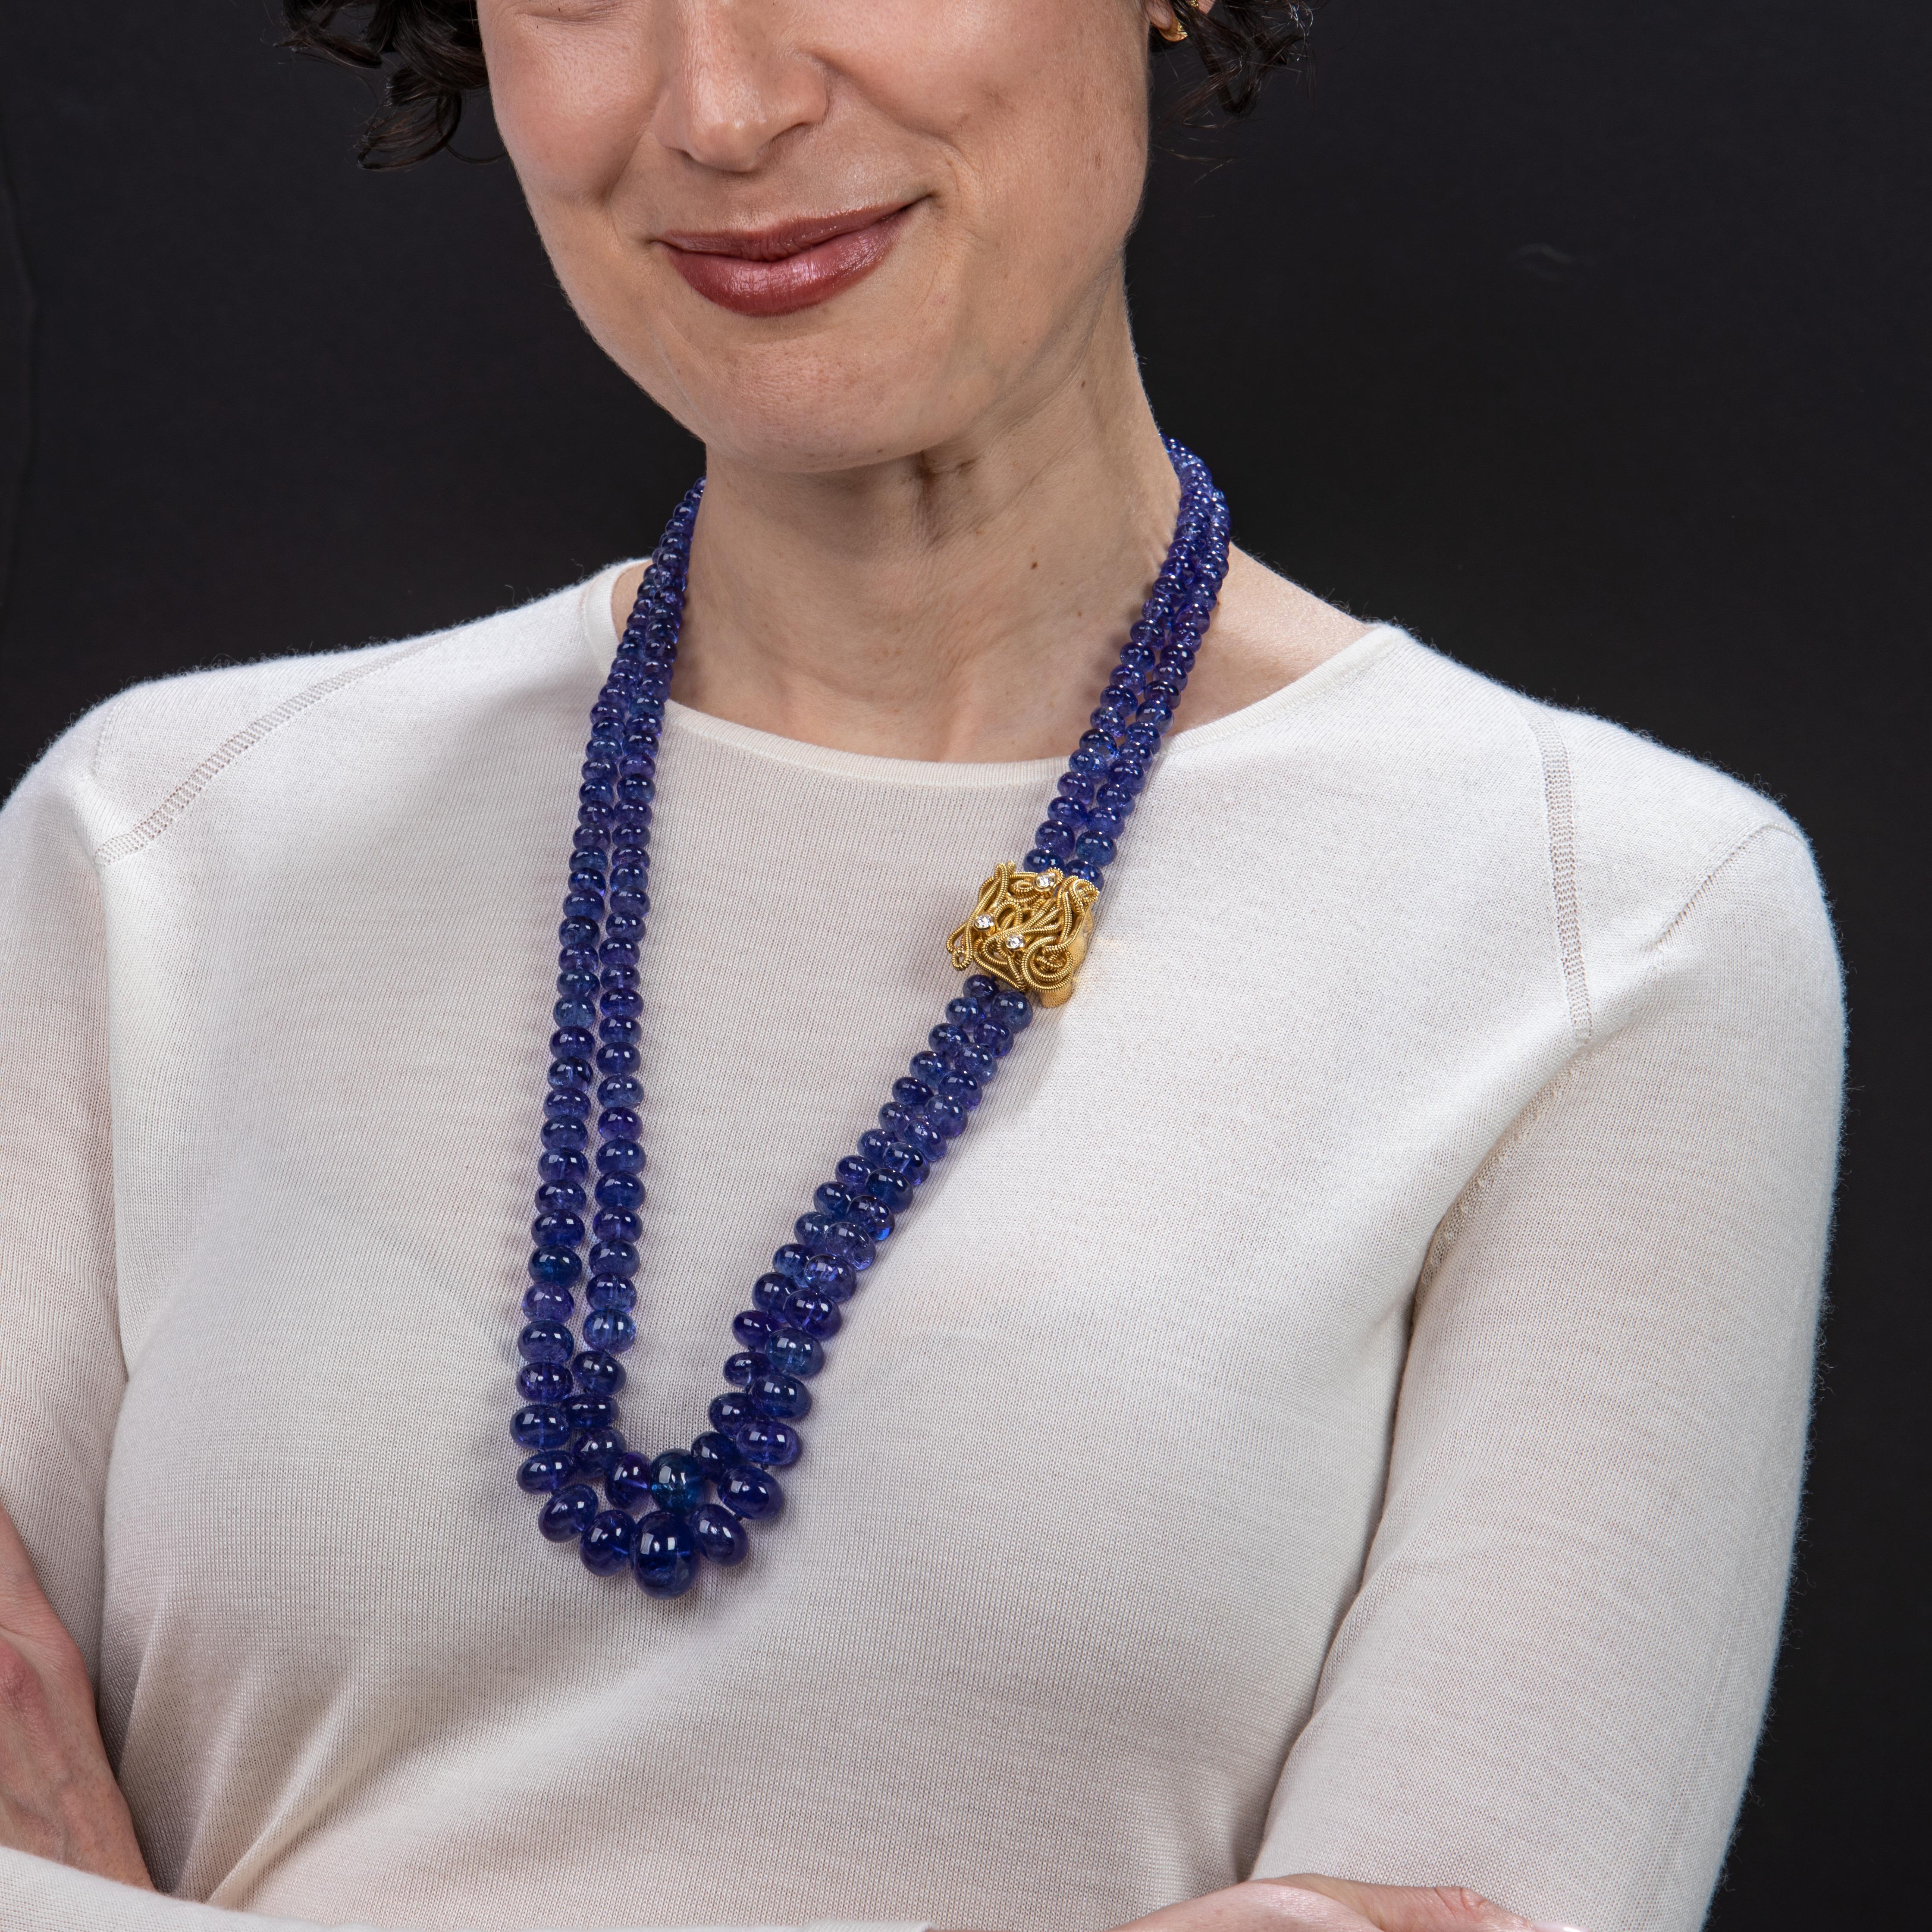 This stunning blue necklace employs a graduated double strand of tanzanite beads in various sizes, and features Gloria Bass' signature gold coil work in an 18k yellow gold clasp beset with three (3) shimmering diamonds for added elegance and